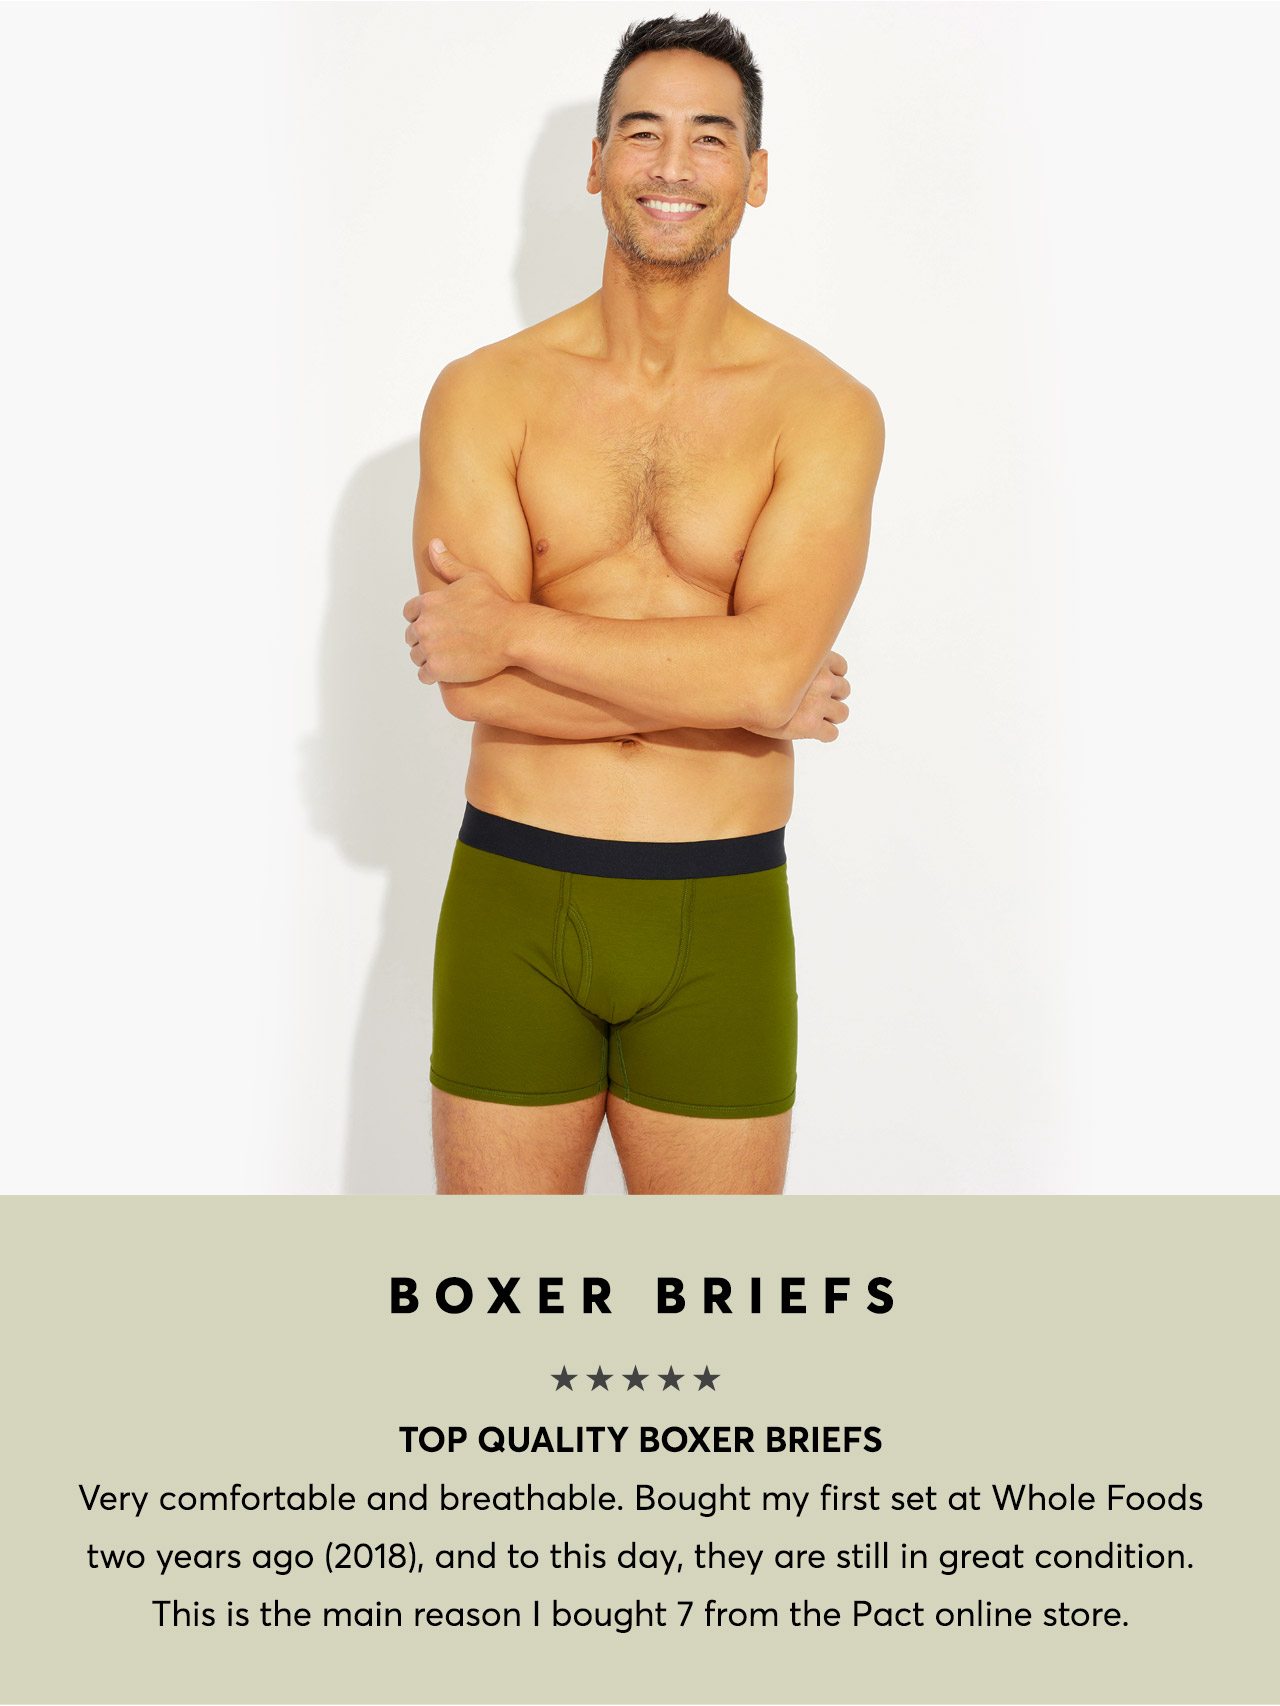 Boxer Briefs: Top quality boxer briefs. Very comfortable and breathable. Bought my first set at Whole Foods two years ago (2018), and to this day, they are still in great condition. This is the main reason I bought 7 from the Pact online store.